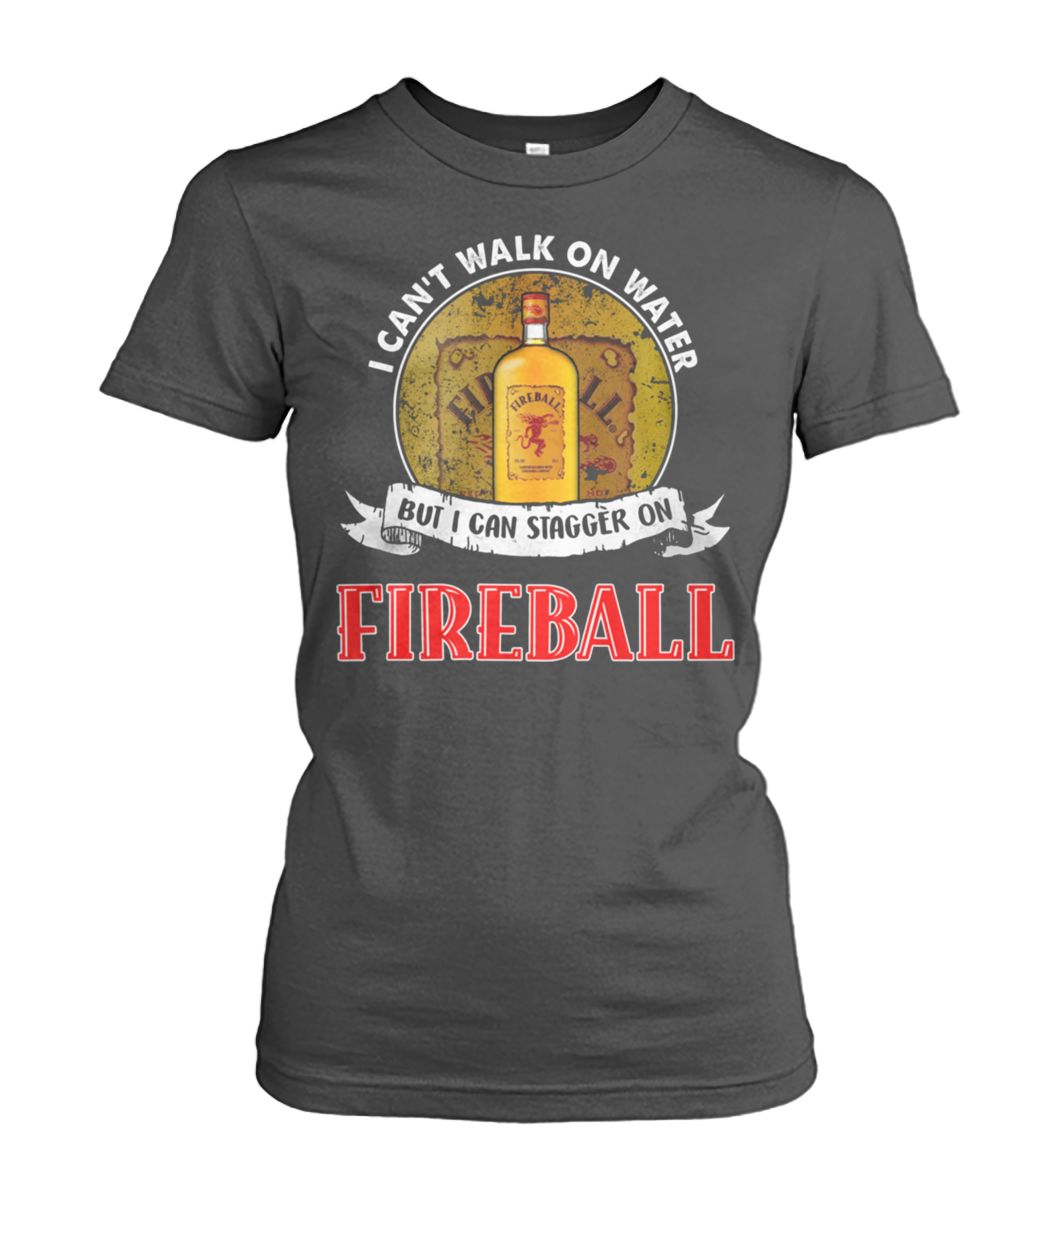 I can't walk on water but I can stagger on fireball women's crew tee